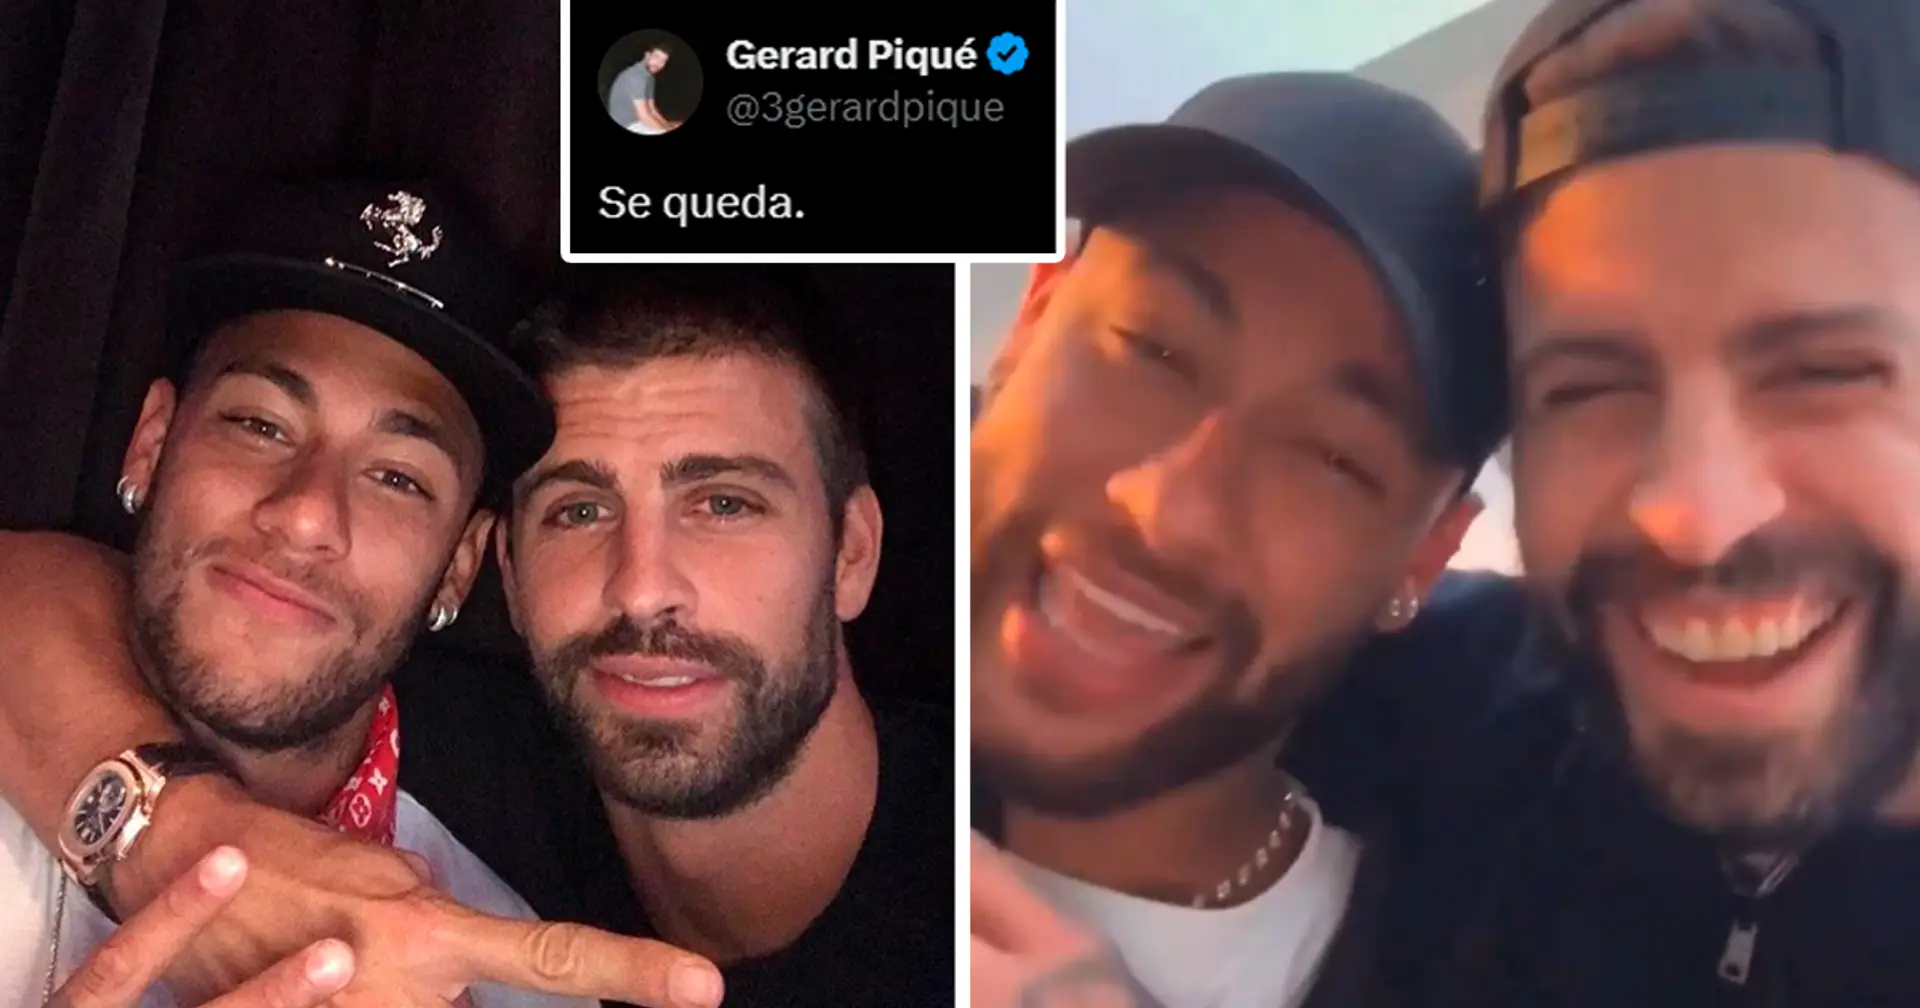 'Now yes, se queda': Neymar and Pique together recreated Gerard’s meme post